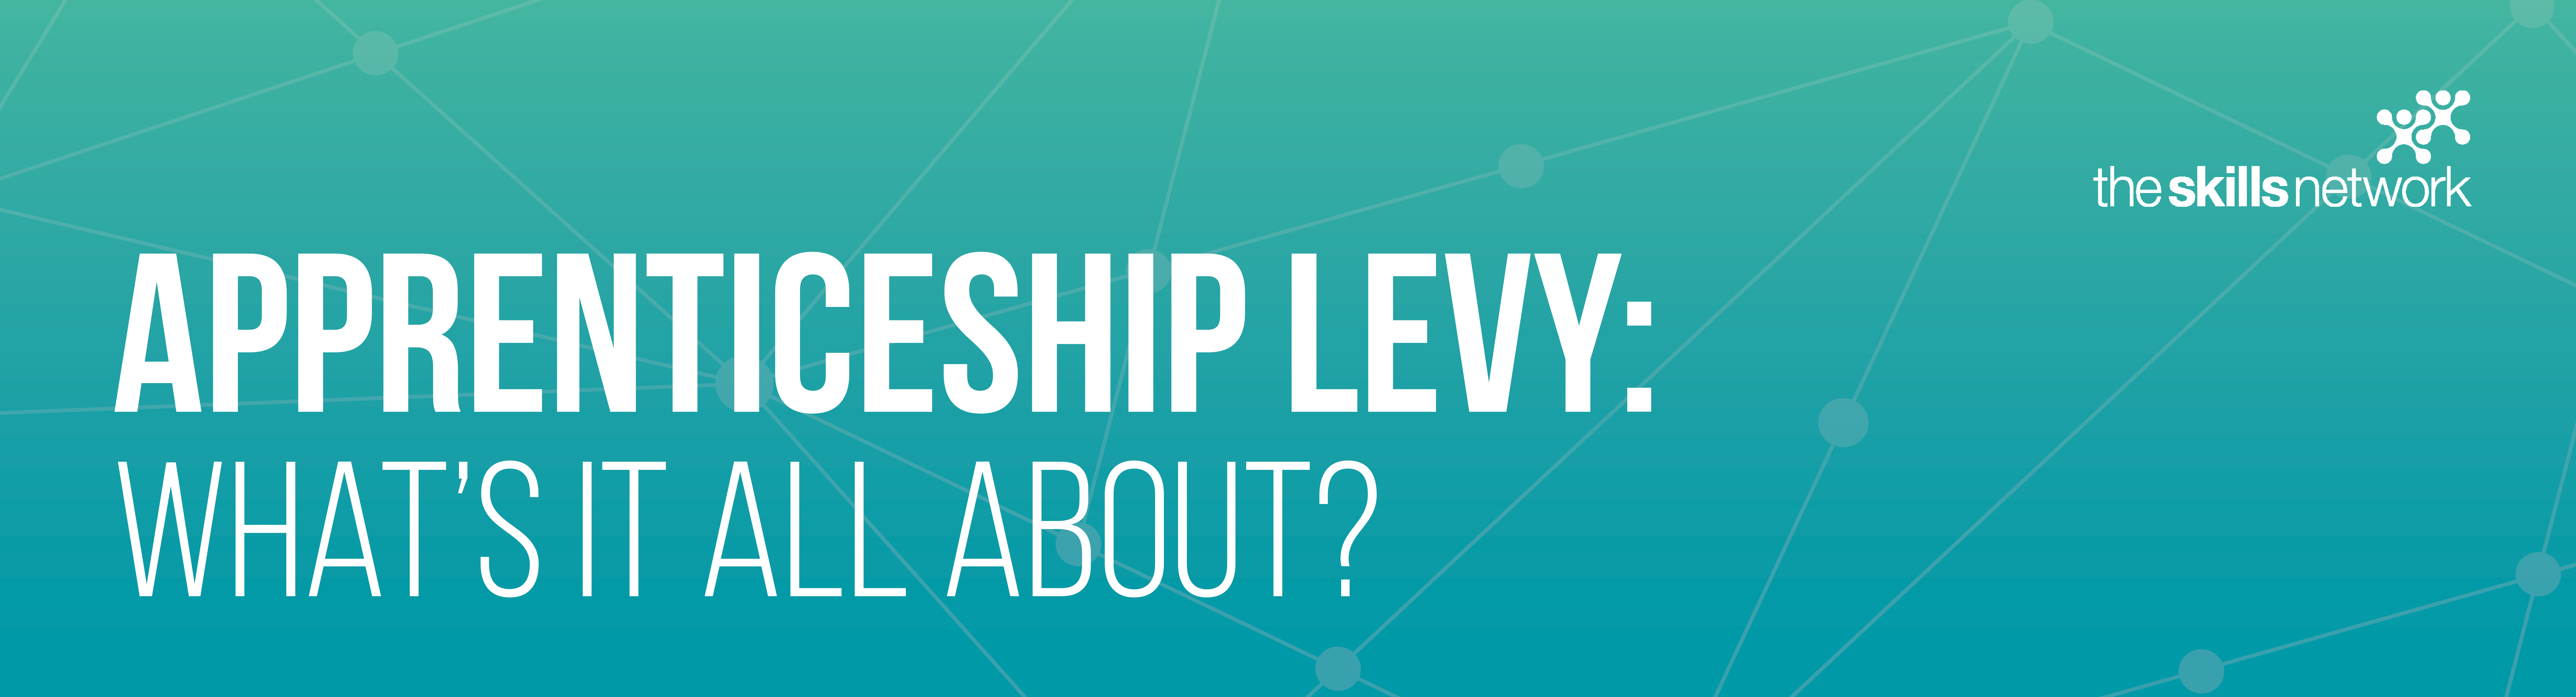 Apprenticeship Levy – What's it All About? | The Skills Network